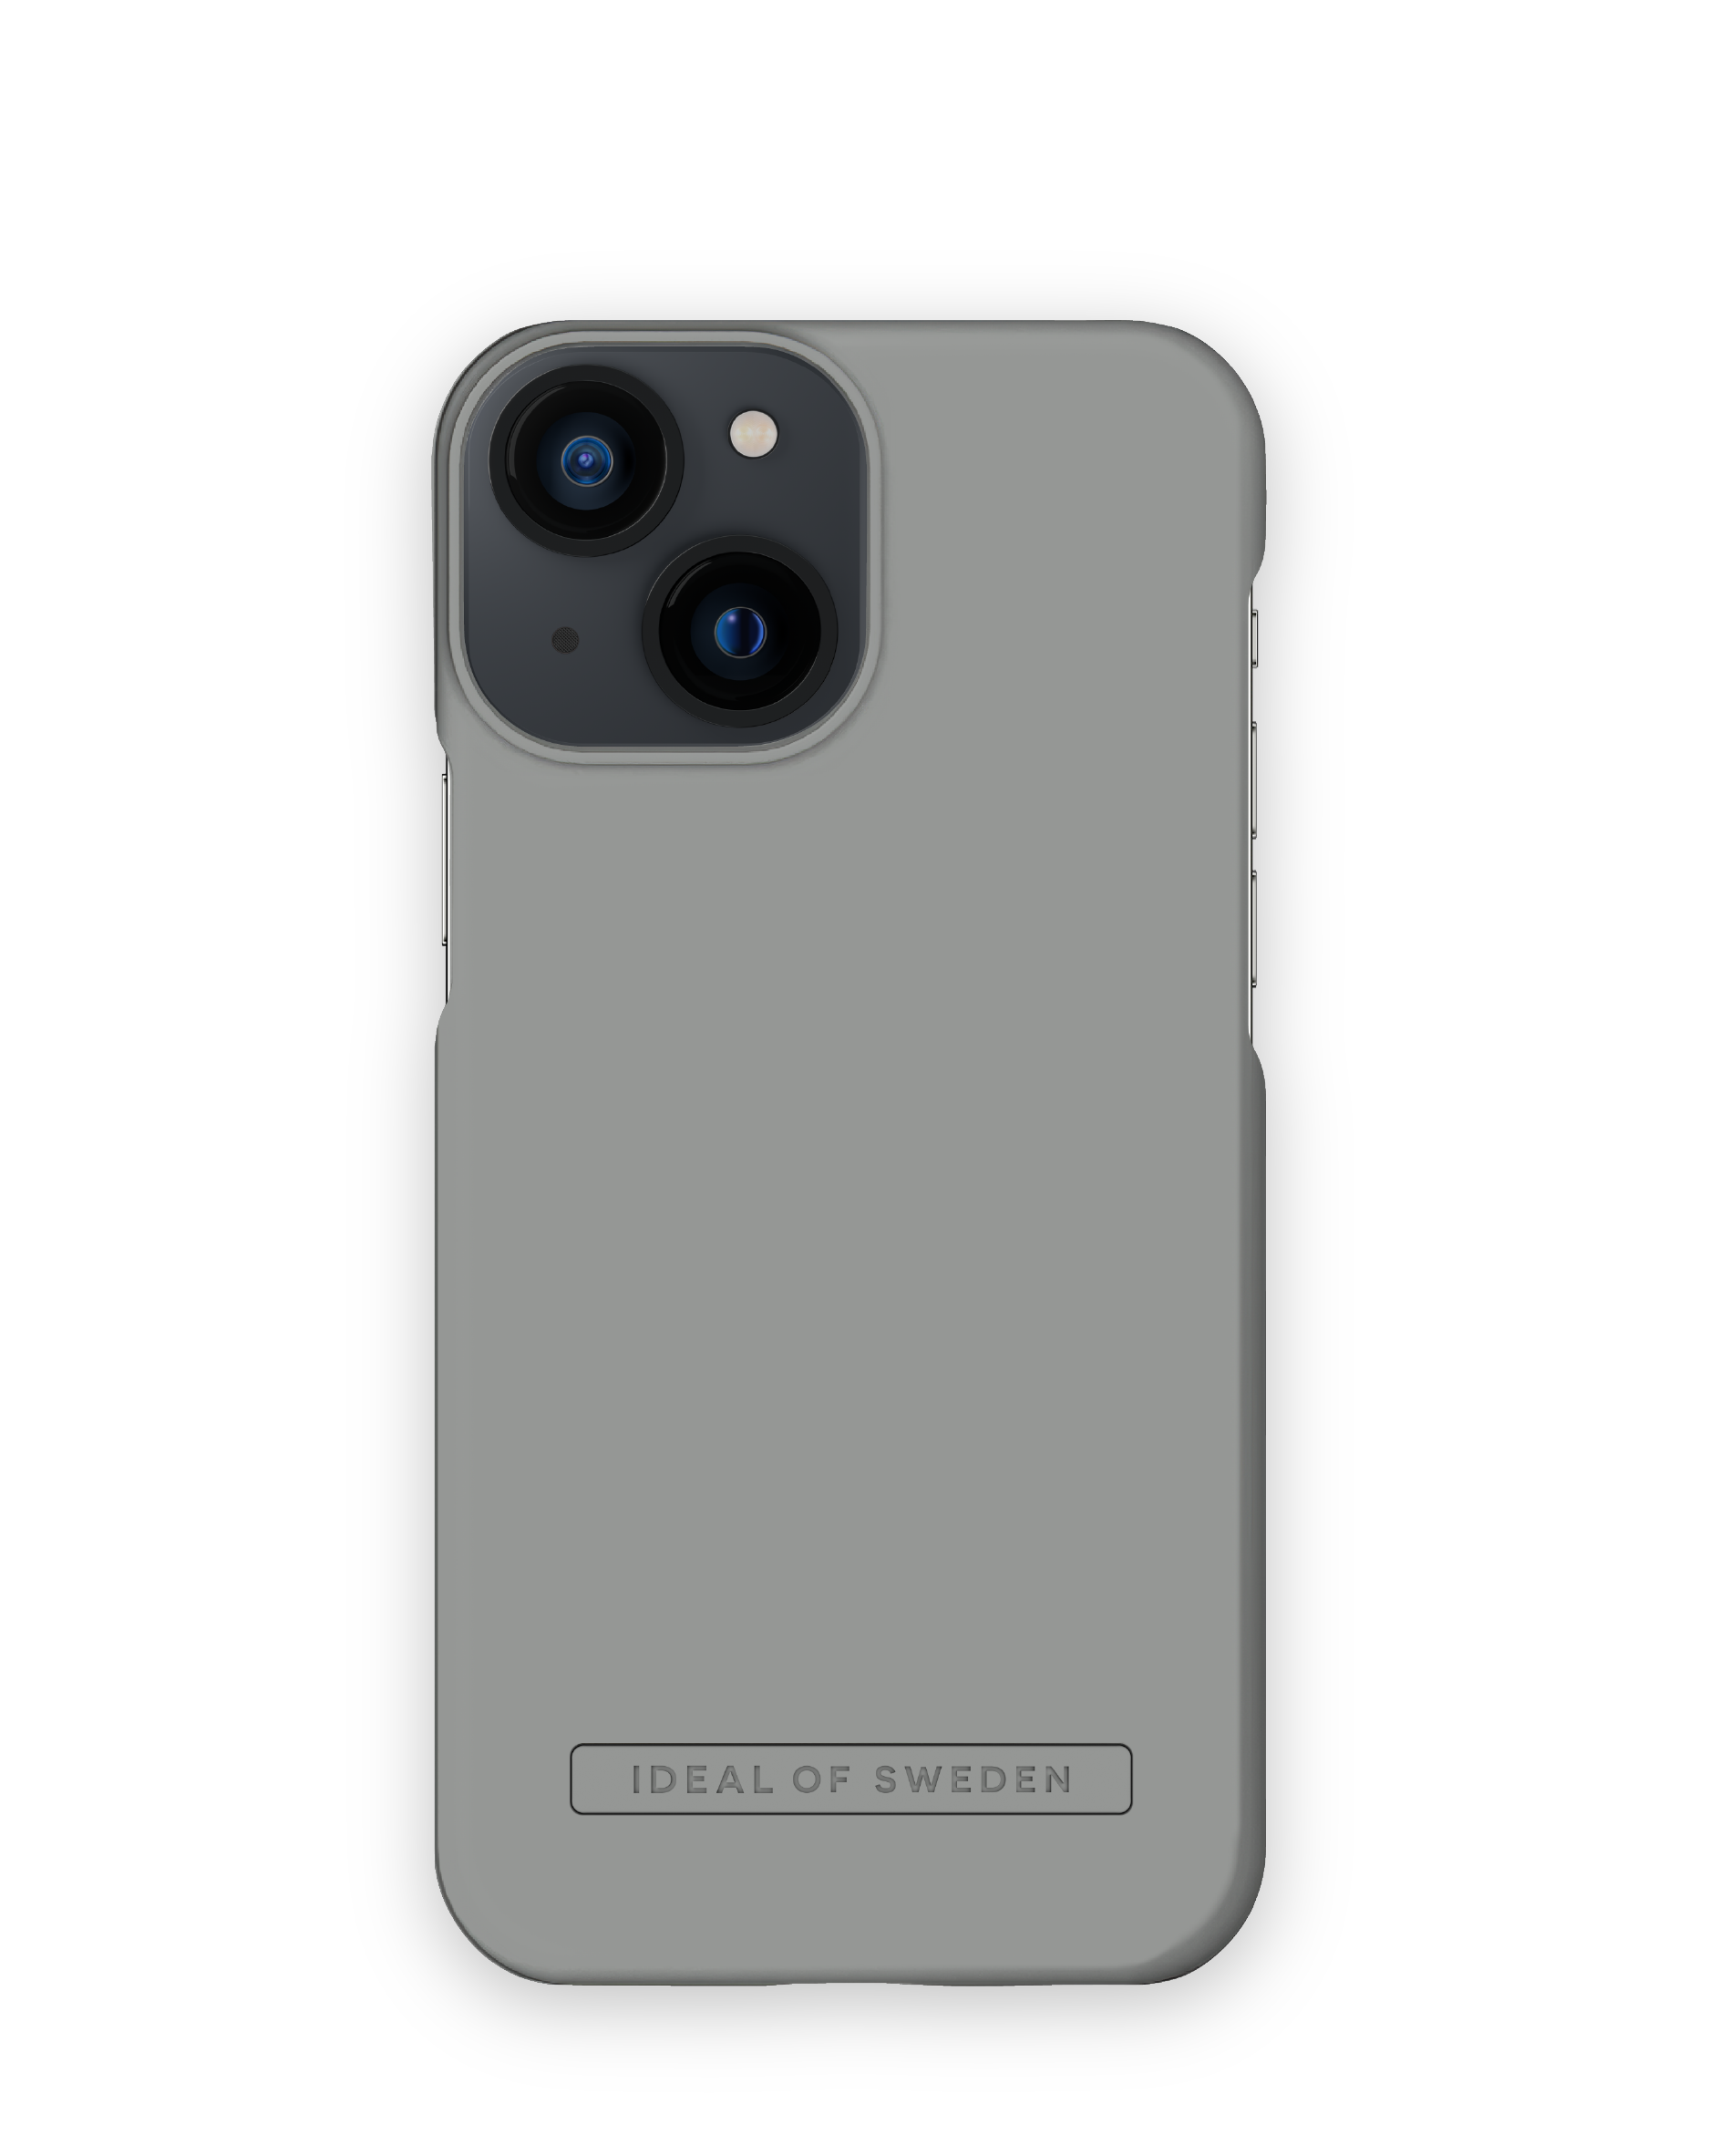 Backcover, 13 Apple, SWEDEN iPhone Ash OF IDEAL Grey Mini, IDFCSS22-I2154-409,